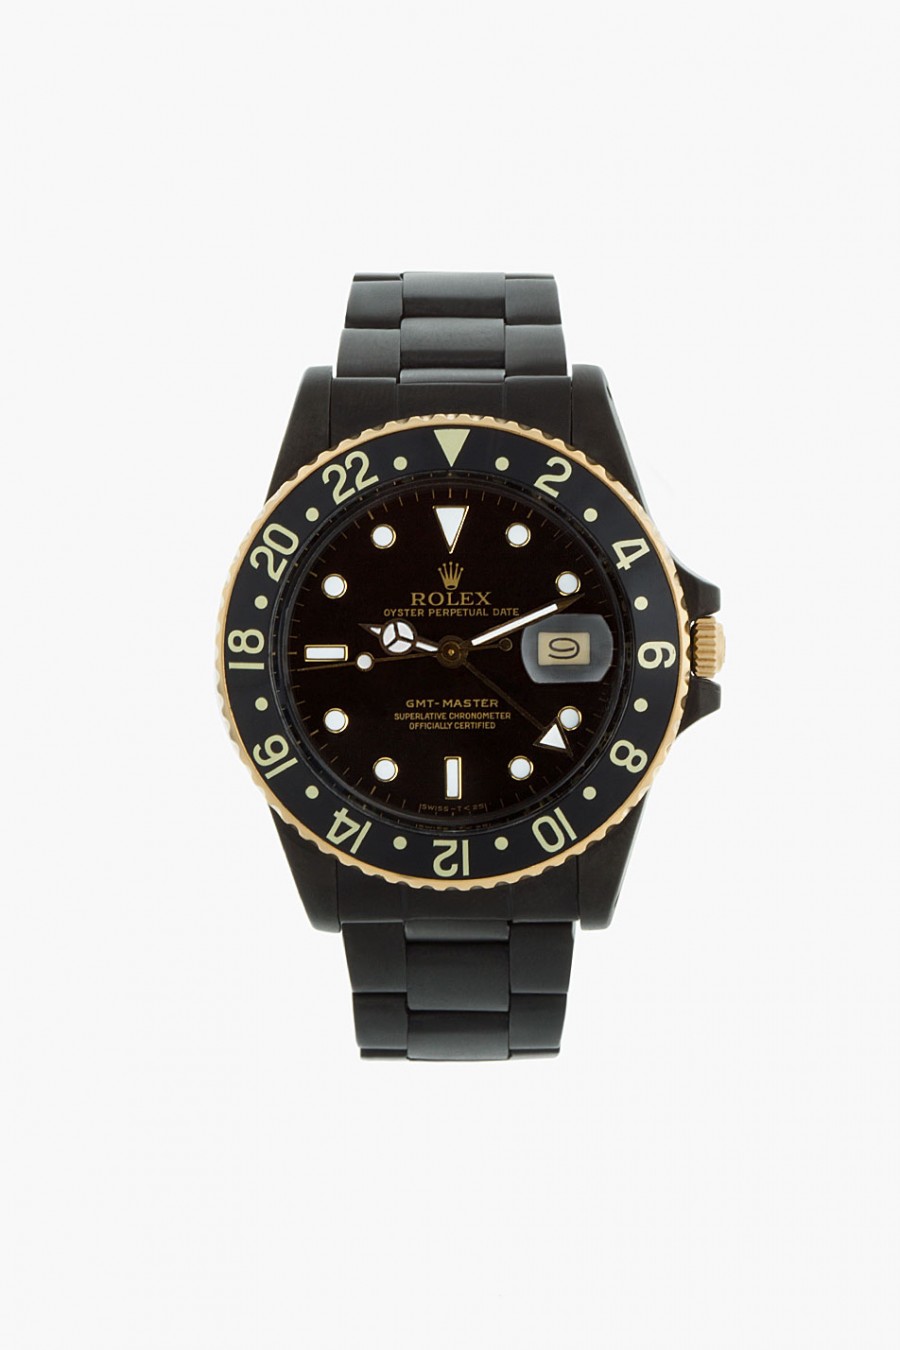 Refurbished Black Limited Edition Rolex Watch Collection SOLETOPIA